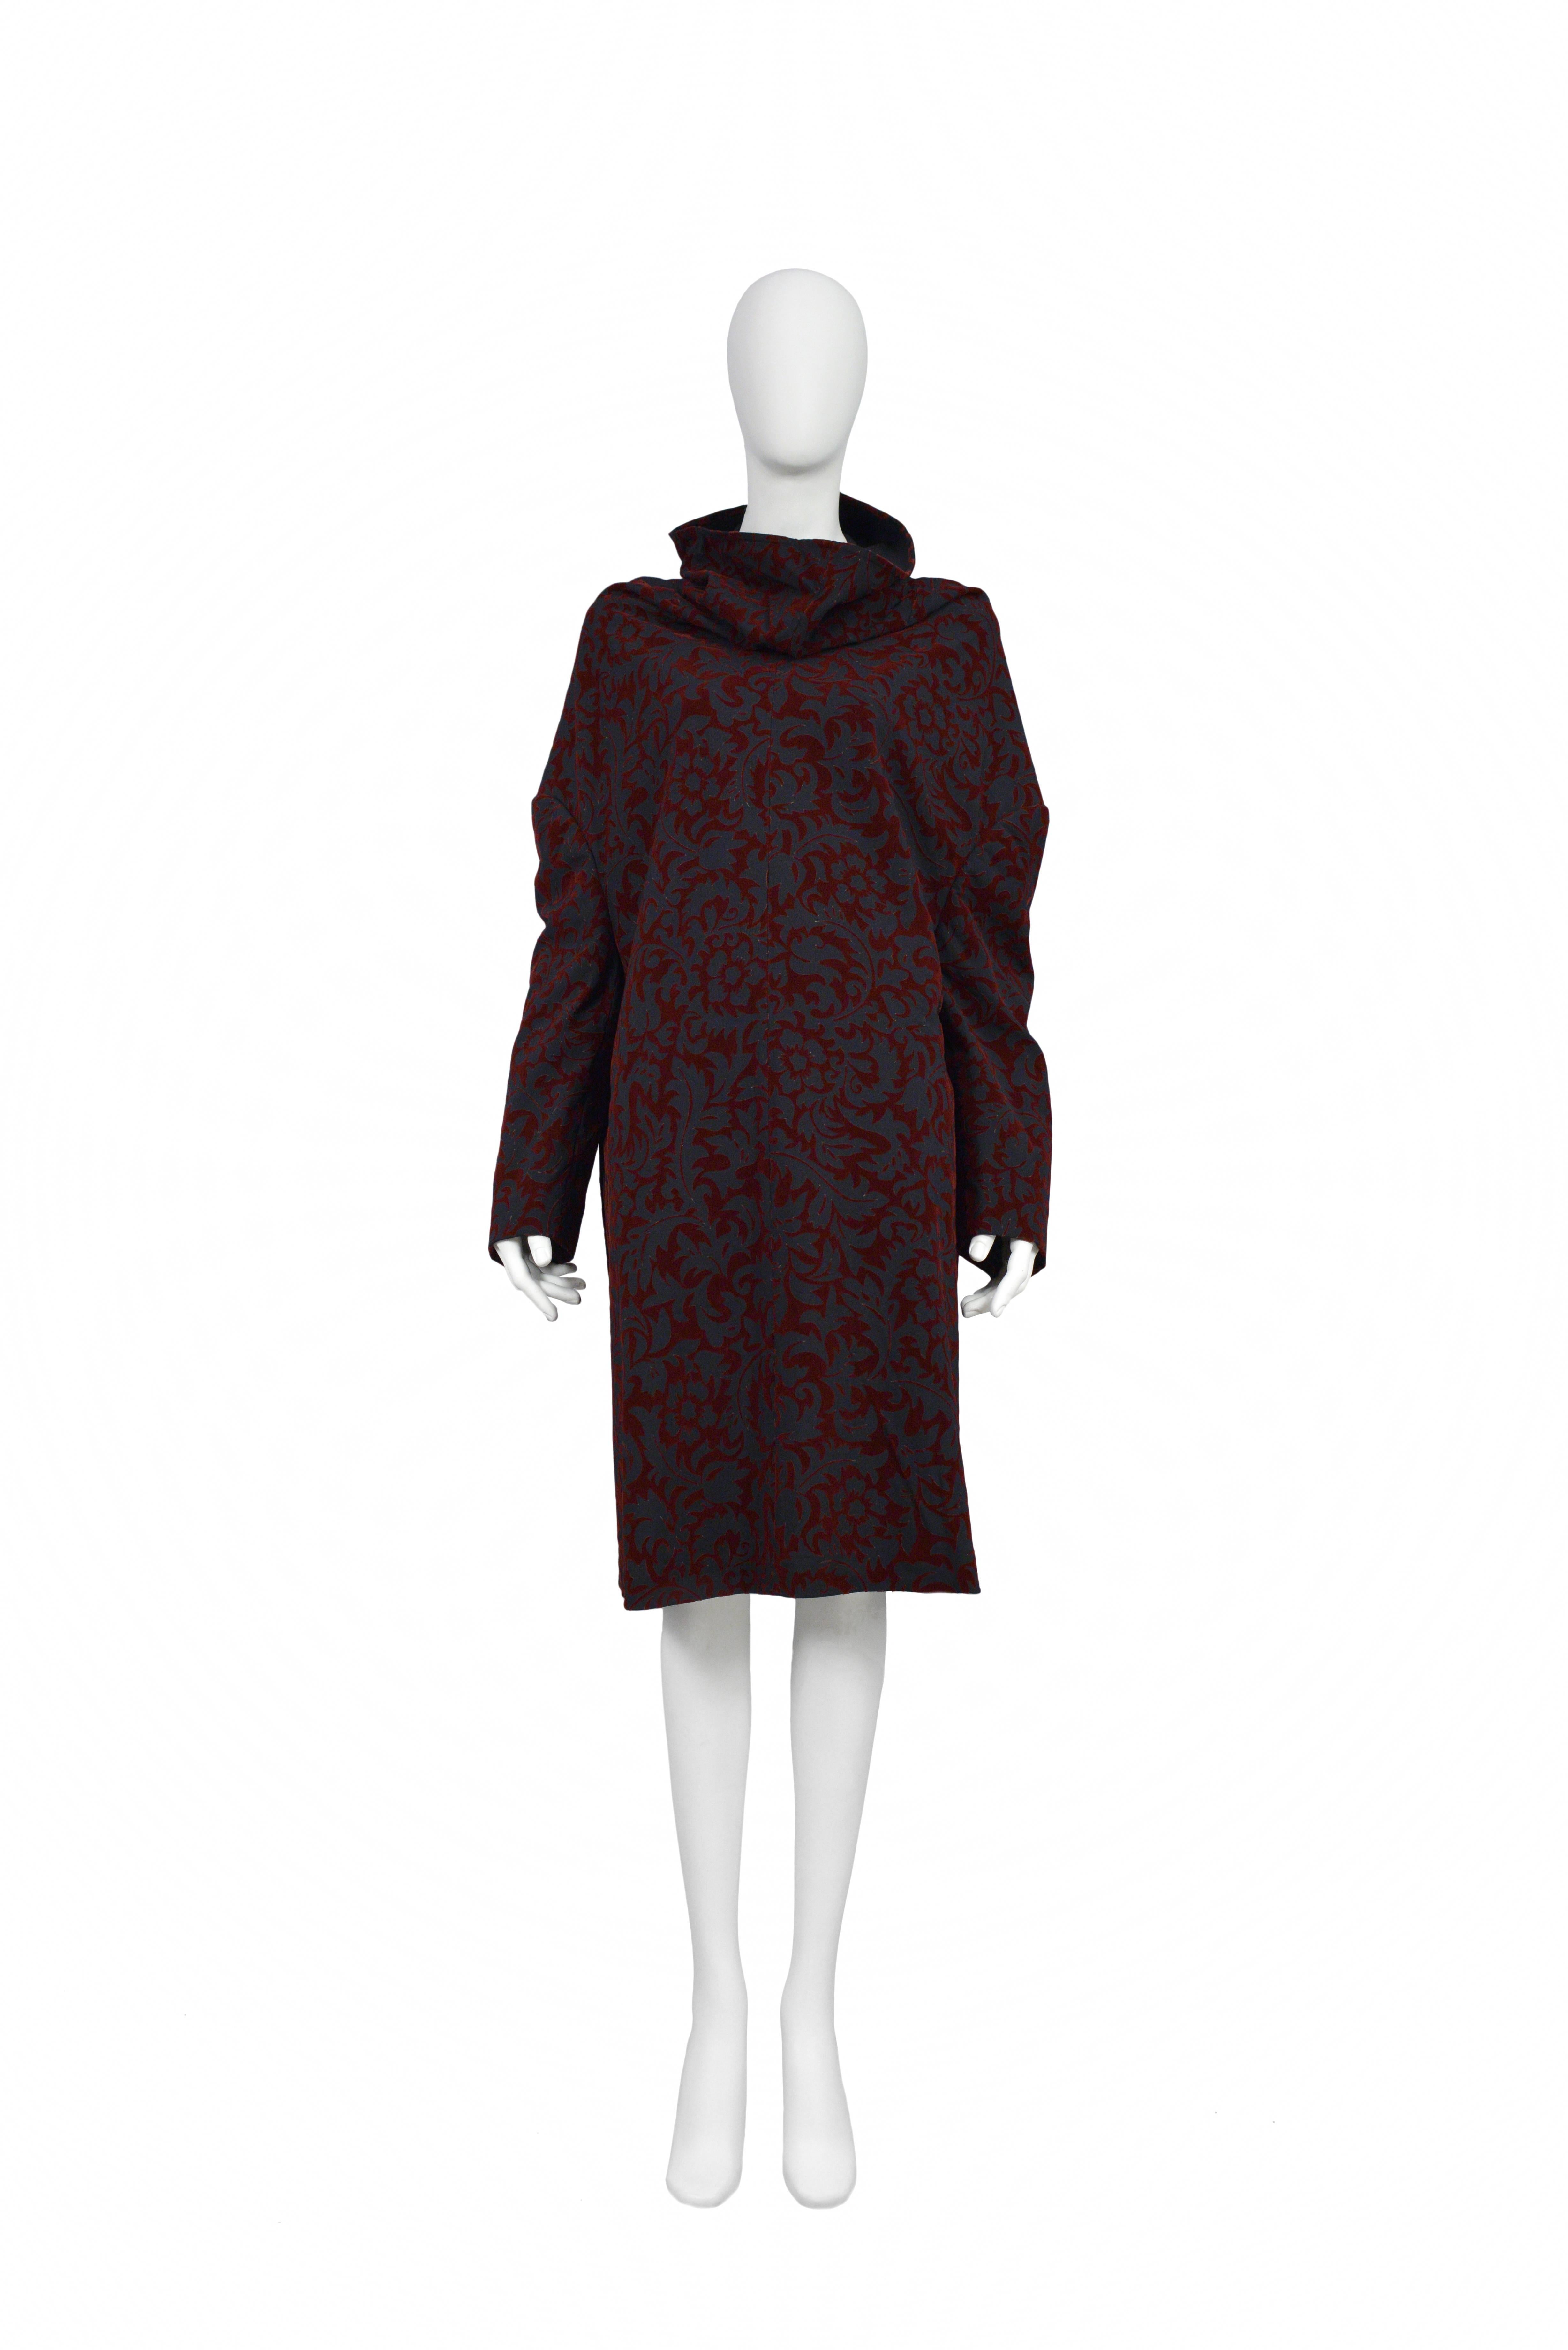 Resurrection Vintage is excited to offer a vintage Comme des Garcons velvet flocked smock dress with a cowl neck, elongated sleeves, and dropped shoulders. AW 1996.

Comme Des Garcons
Size: Medium
Measurements: Bust 47